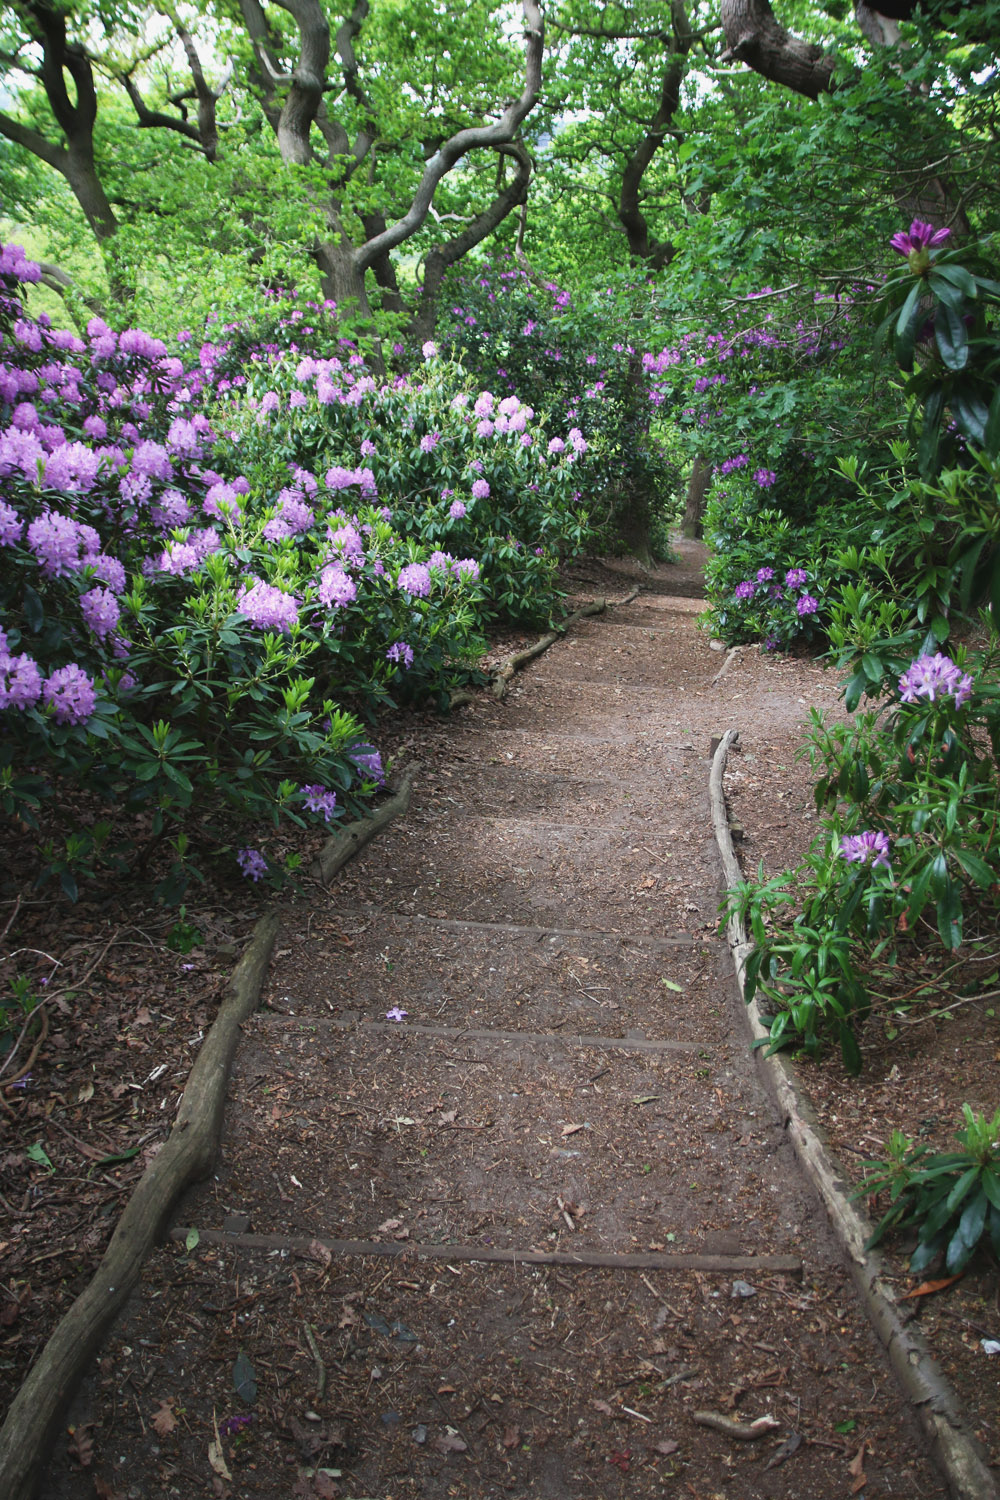 Rhododendrons at Sheringham Park